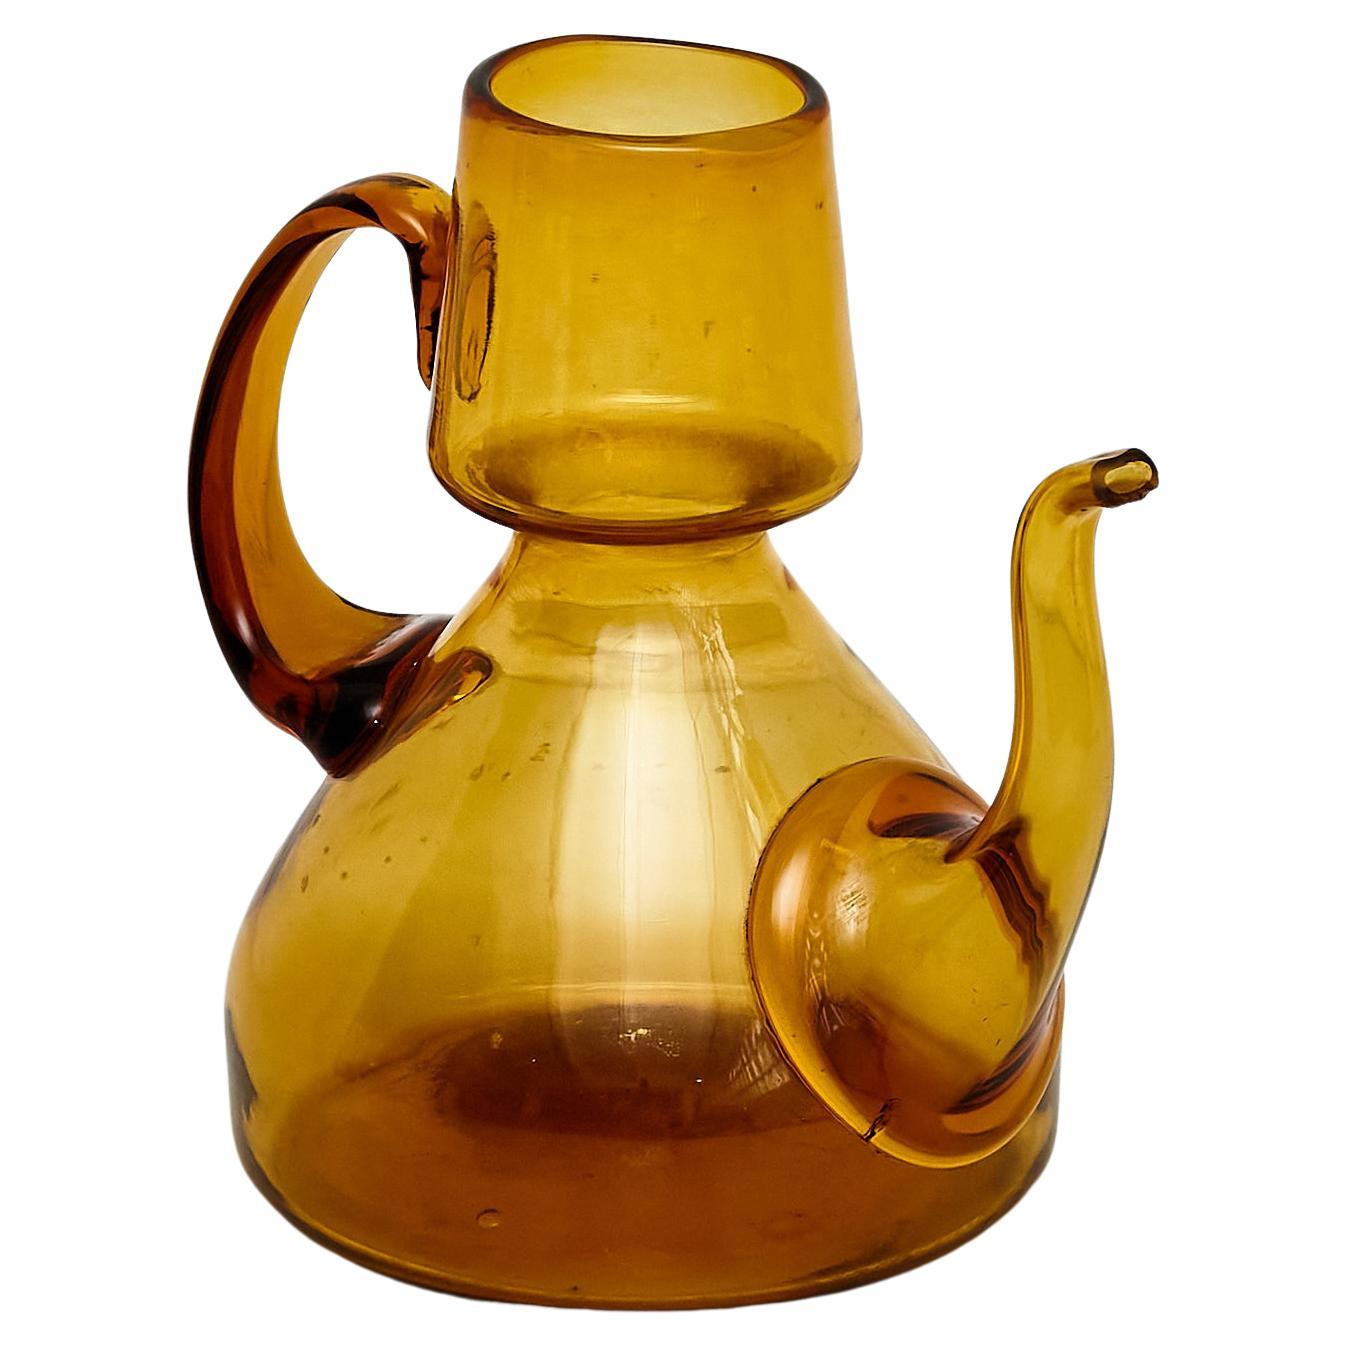 Immerse yourself in nostalgia with this beautiful amber blown glass oil cruet dating back to around 1940. This charming piece is a testament to mid-20th-century craftsmanship, evoking the warmth of a bygone era.

The subtlety of the amber blown